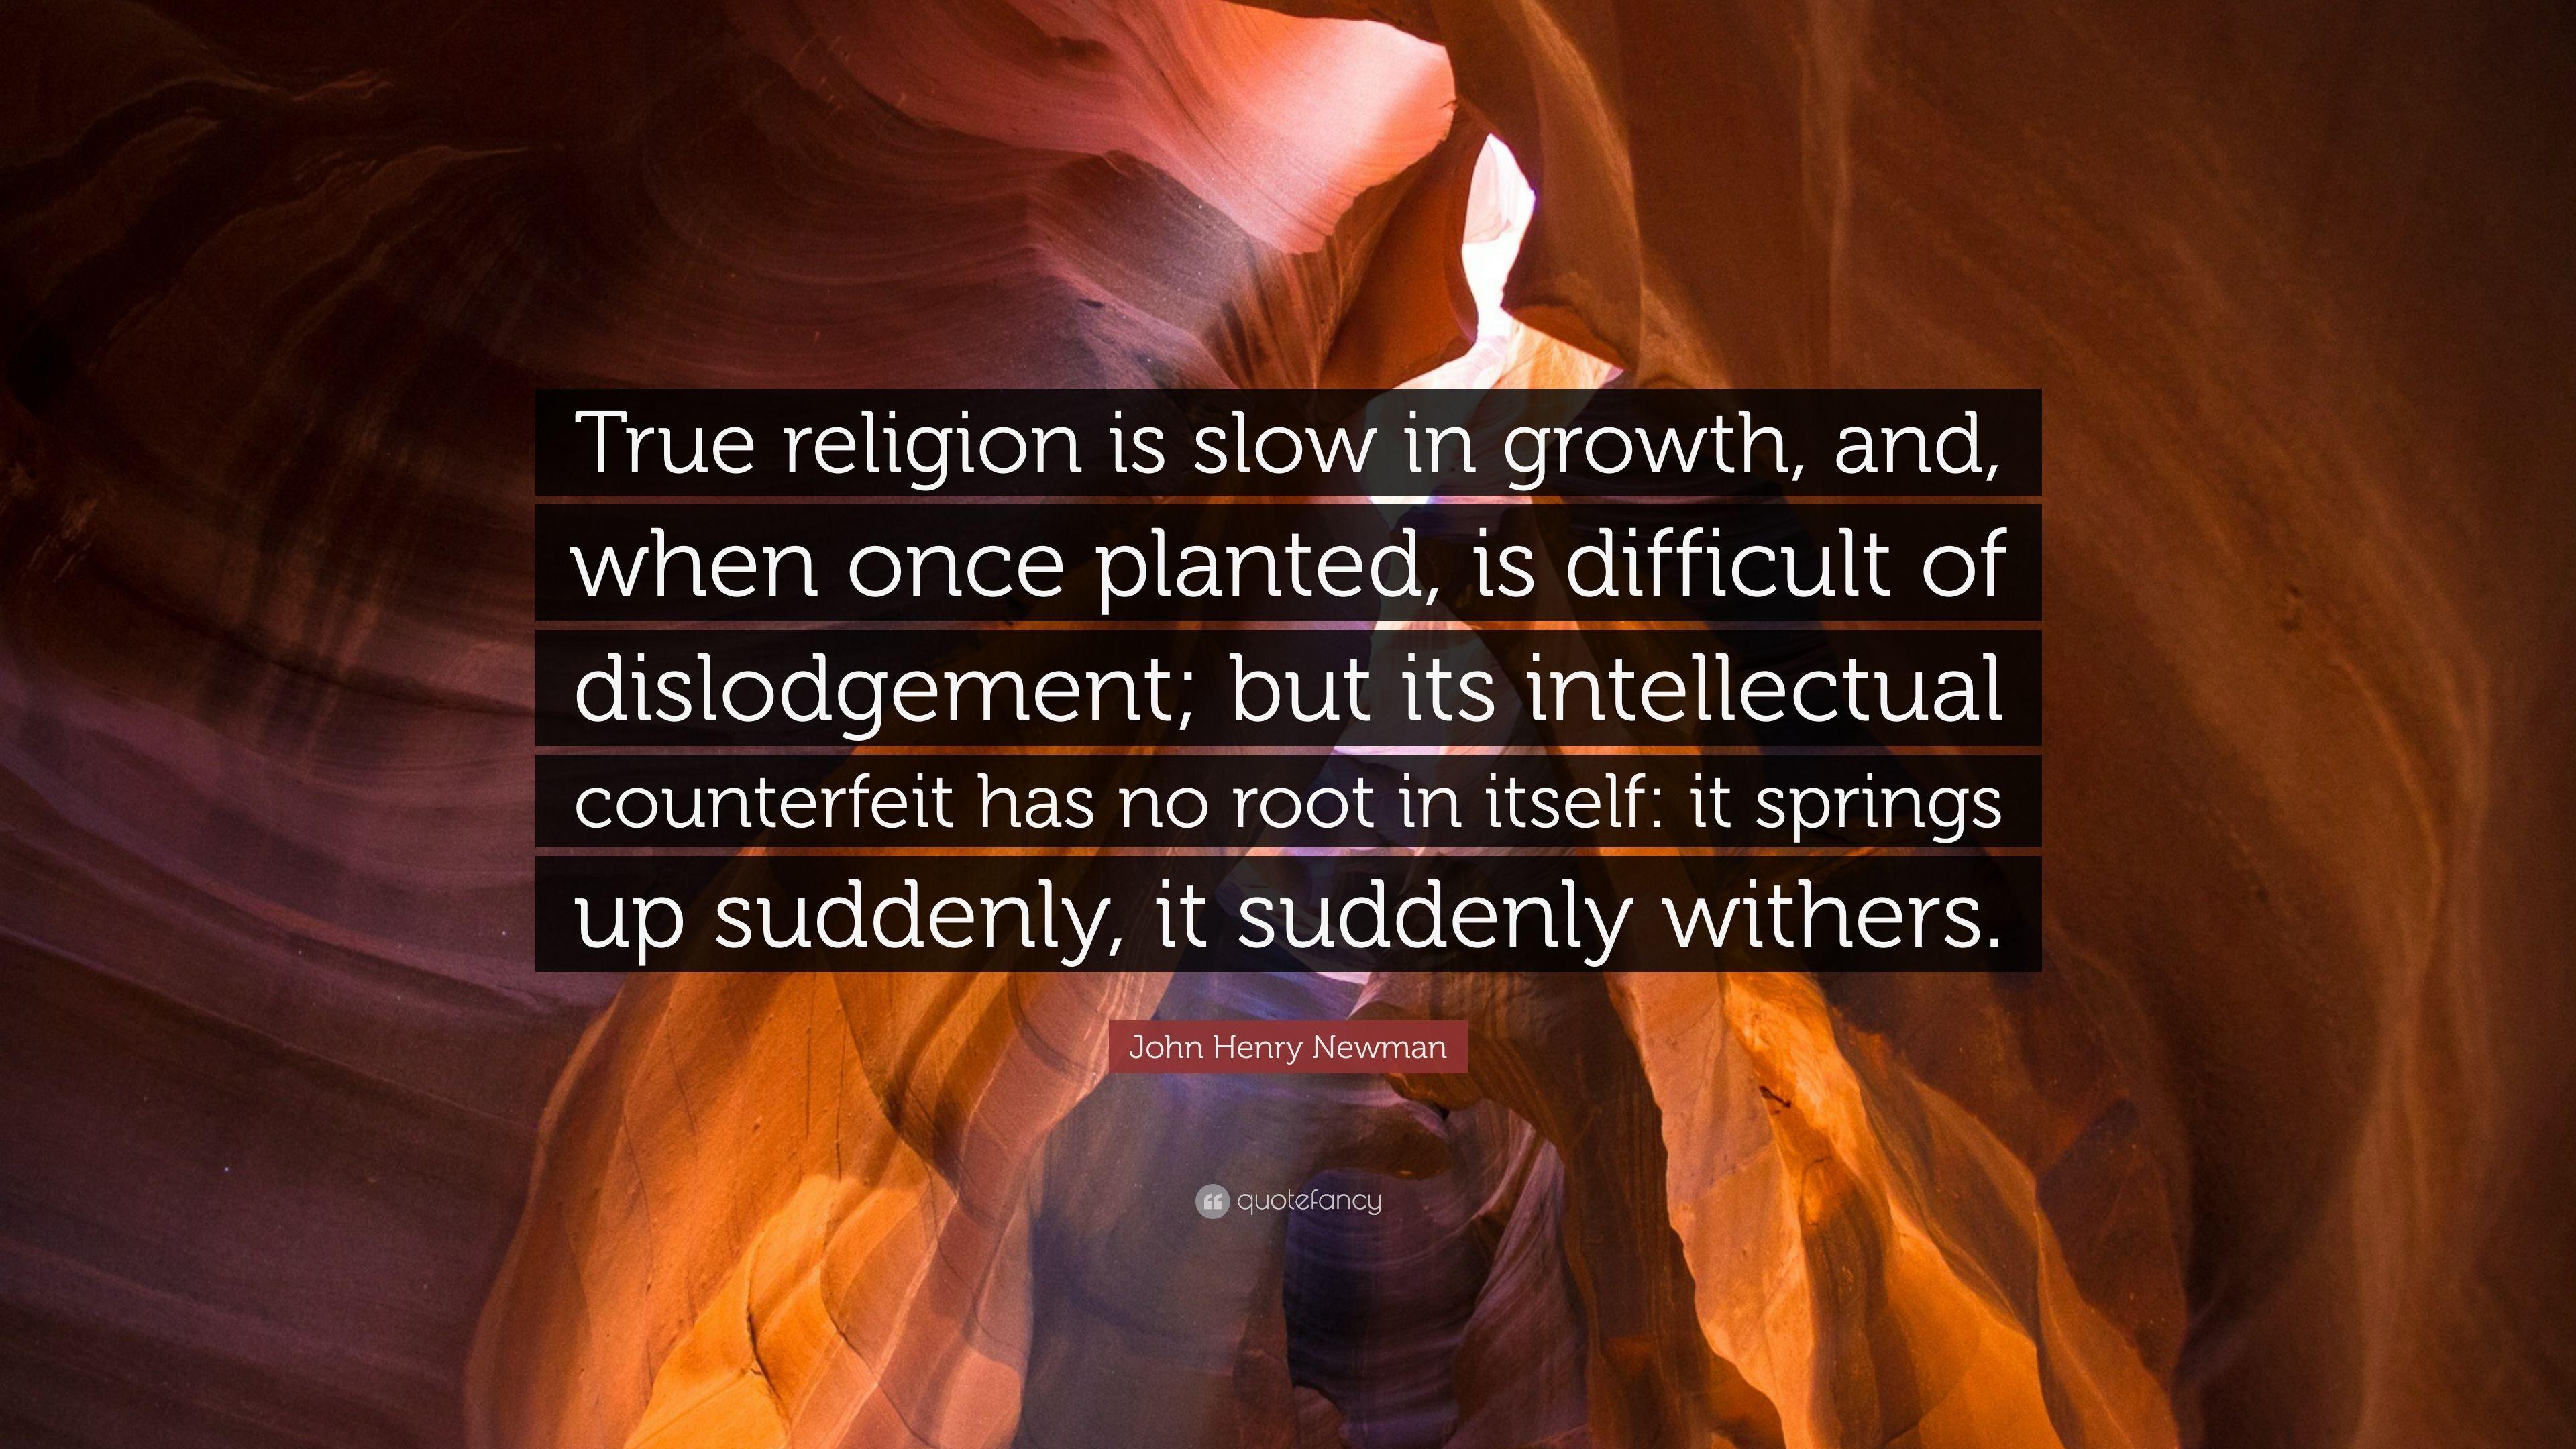 John Henry Newman Quote: “True religion is slow in growth